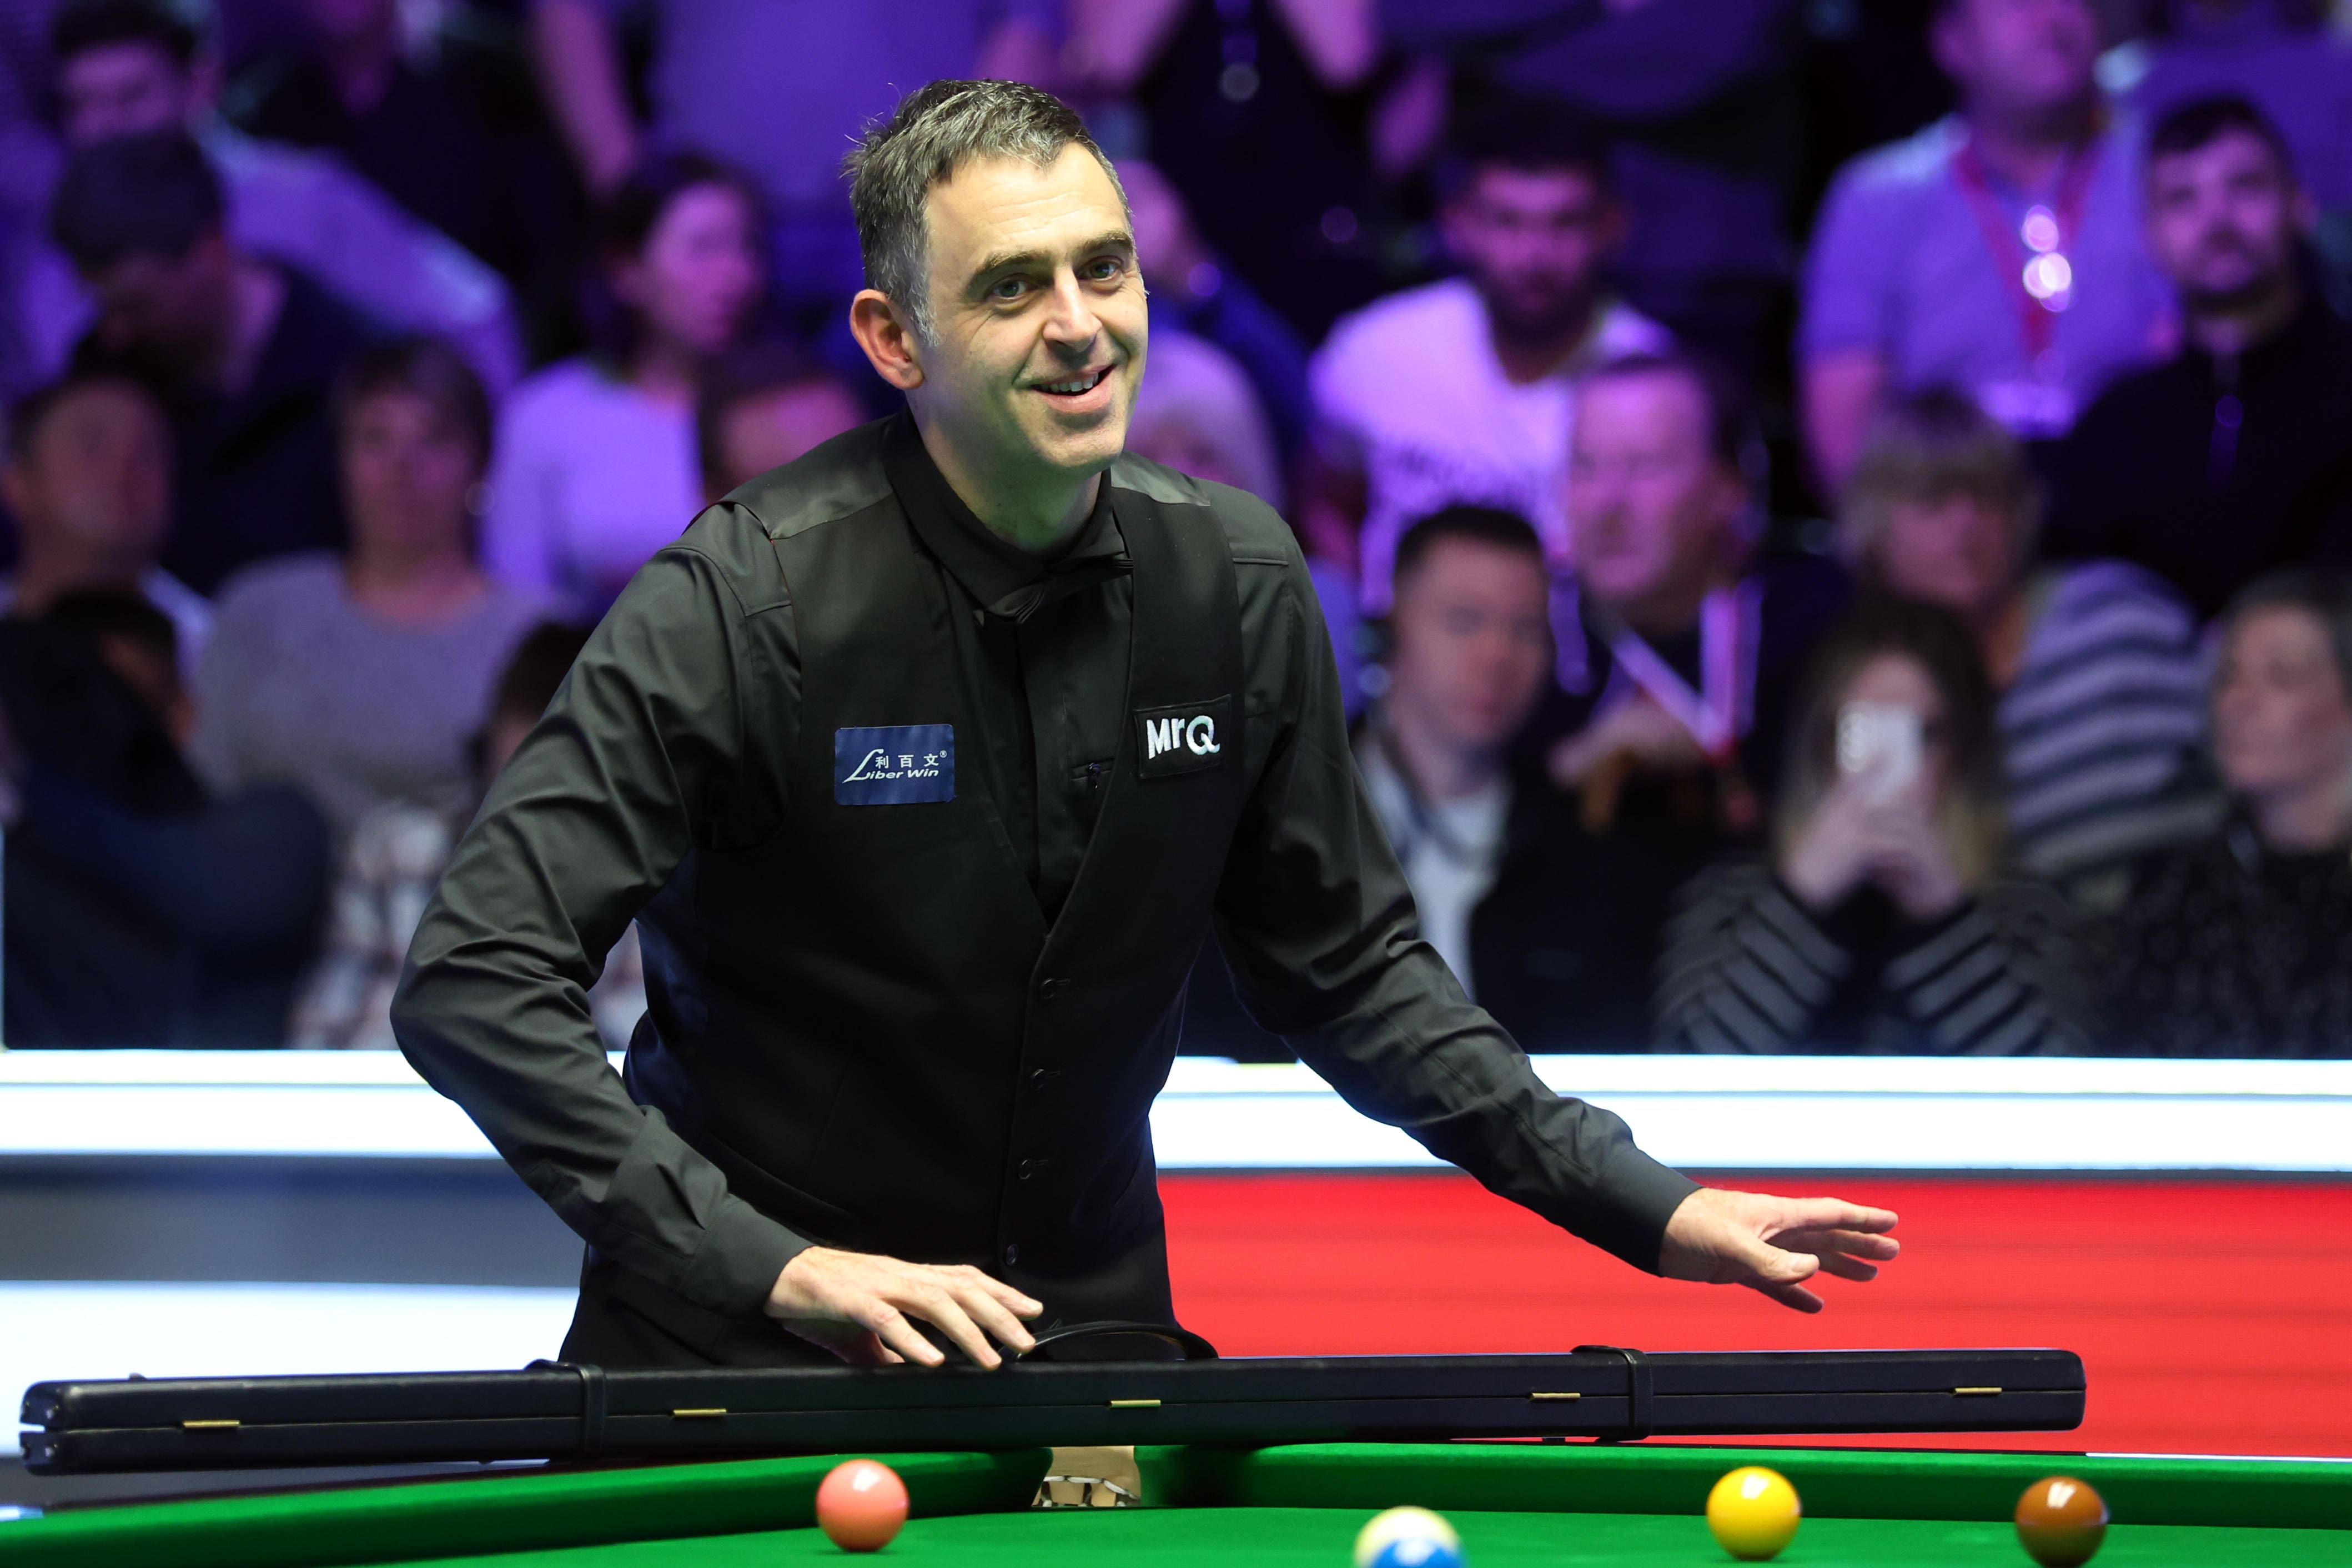 Ronnie O’Sullivan is into the UK Championships quarter-finals